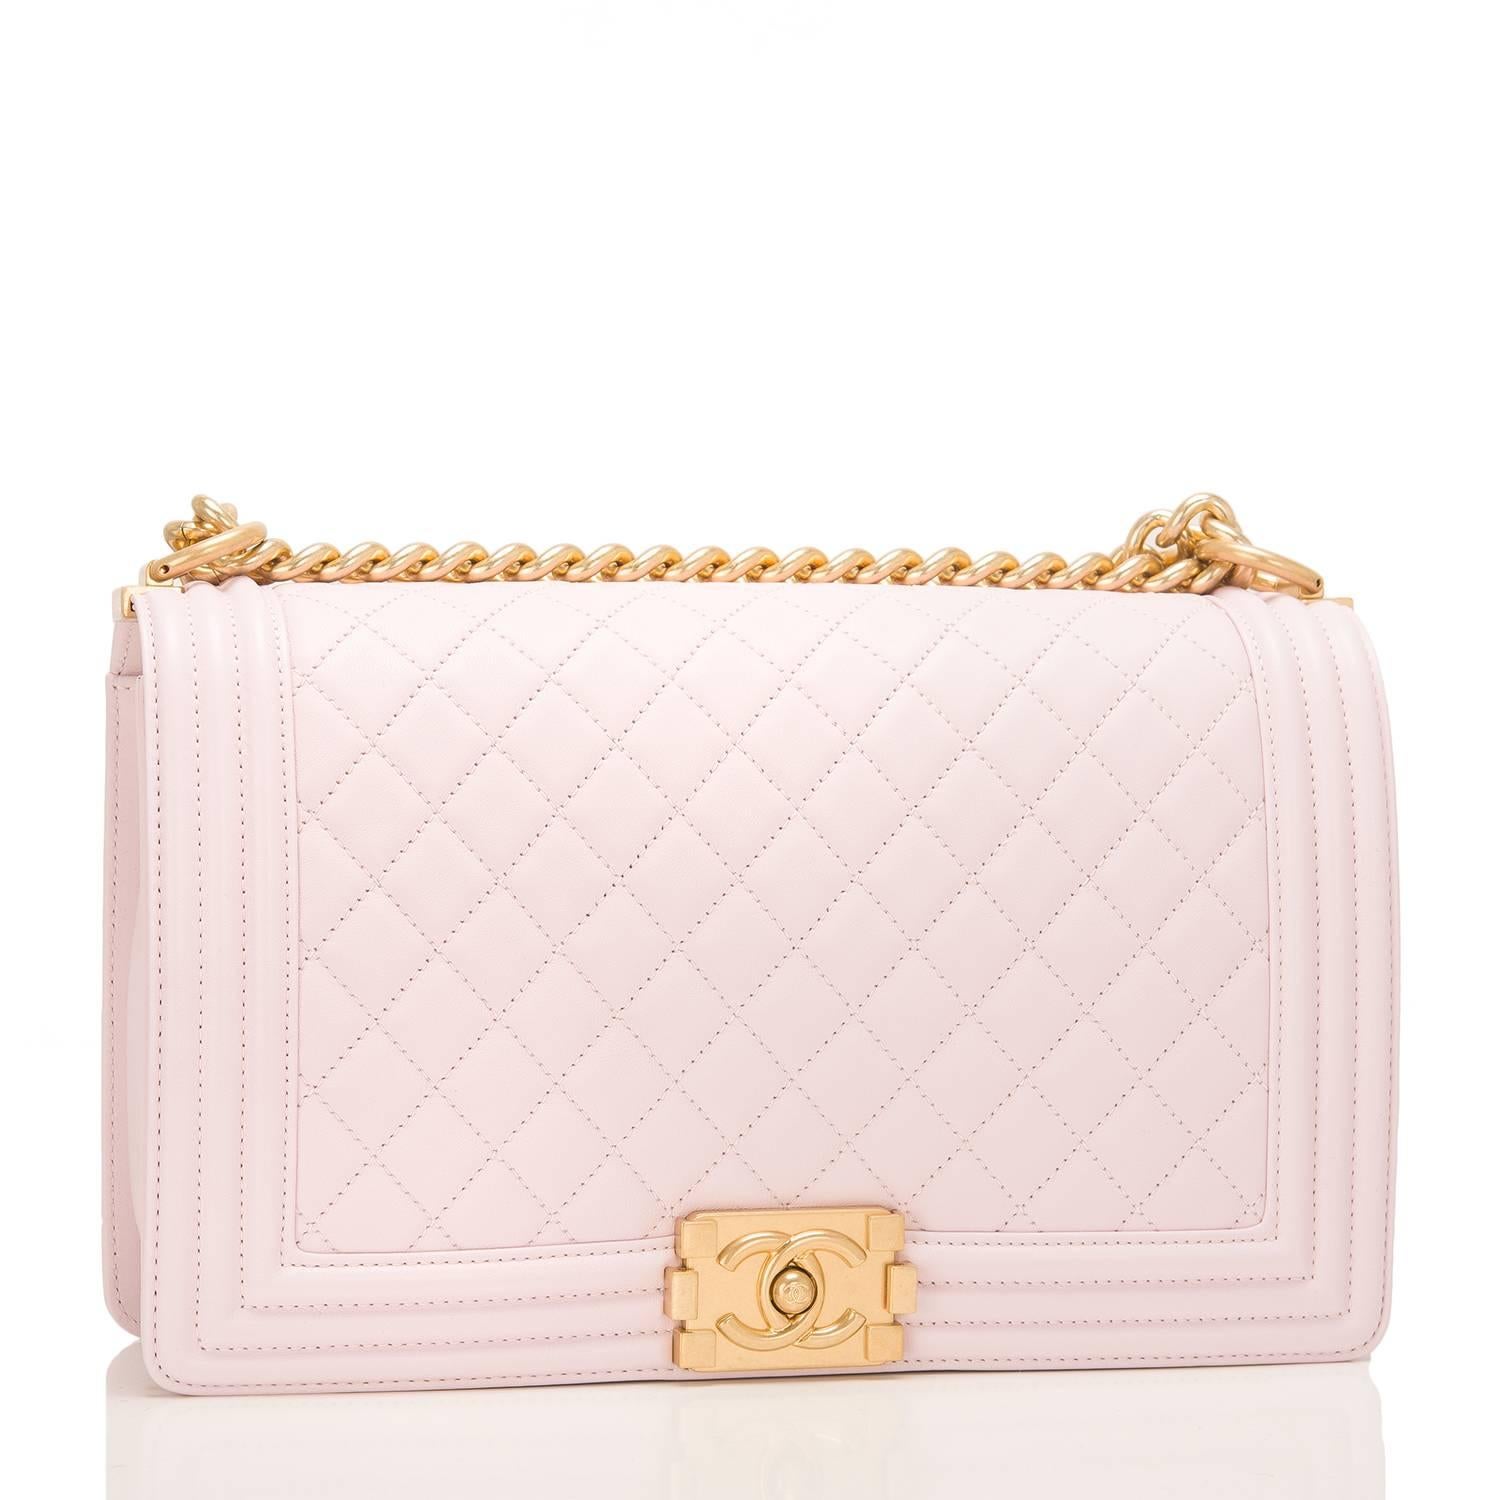 Chanel New Medium Boy bag of pink lambskin leather with antique gold tone hardware.

This bag features a full front flap with the Le Boy CC push lock closure and an antique gold tone chain link and pink leather padded shoulder/crossbody